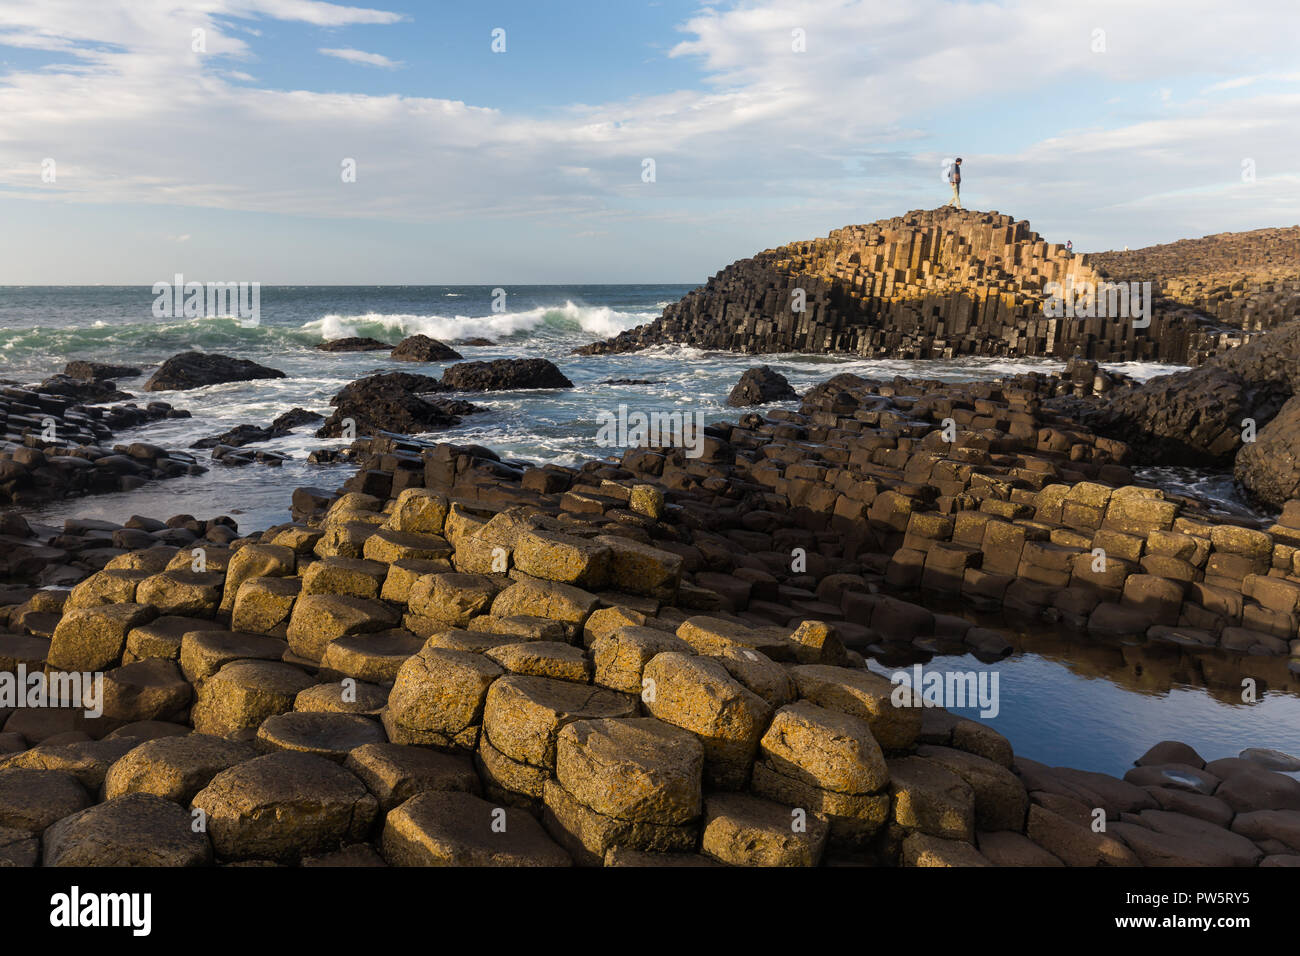 Giants Causeway, County Antrim, N.Ireland, 12th October, 2018. UK Weather: Bright sunny afternoon with strong gusts following strong winds and grey skies from Storm Callum in the morning. Tourists enjoy wonderful bright conditions at Northern Ireland’s top attraction, with thousands of basalt hexagonal columns. Credit: Ian Proctor/Alamy Live News Stock Photo